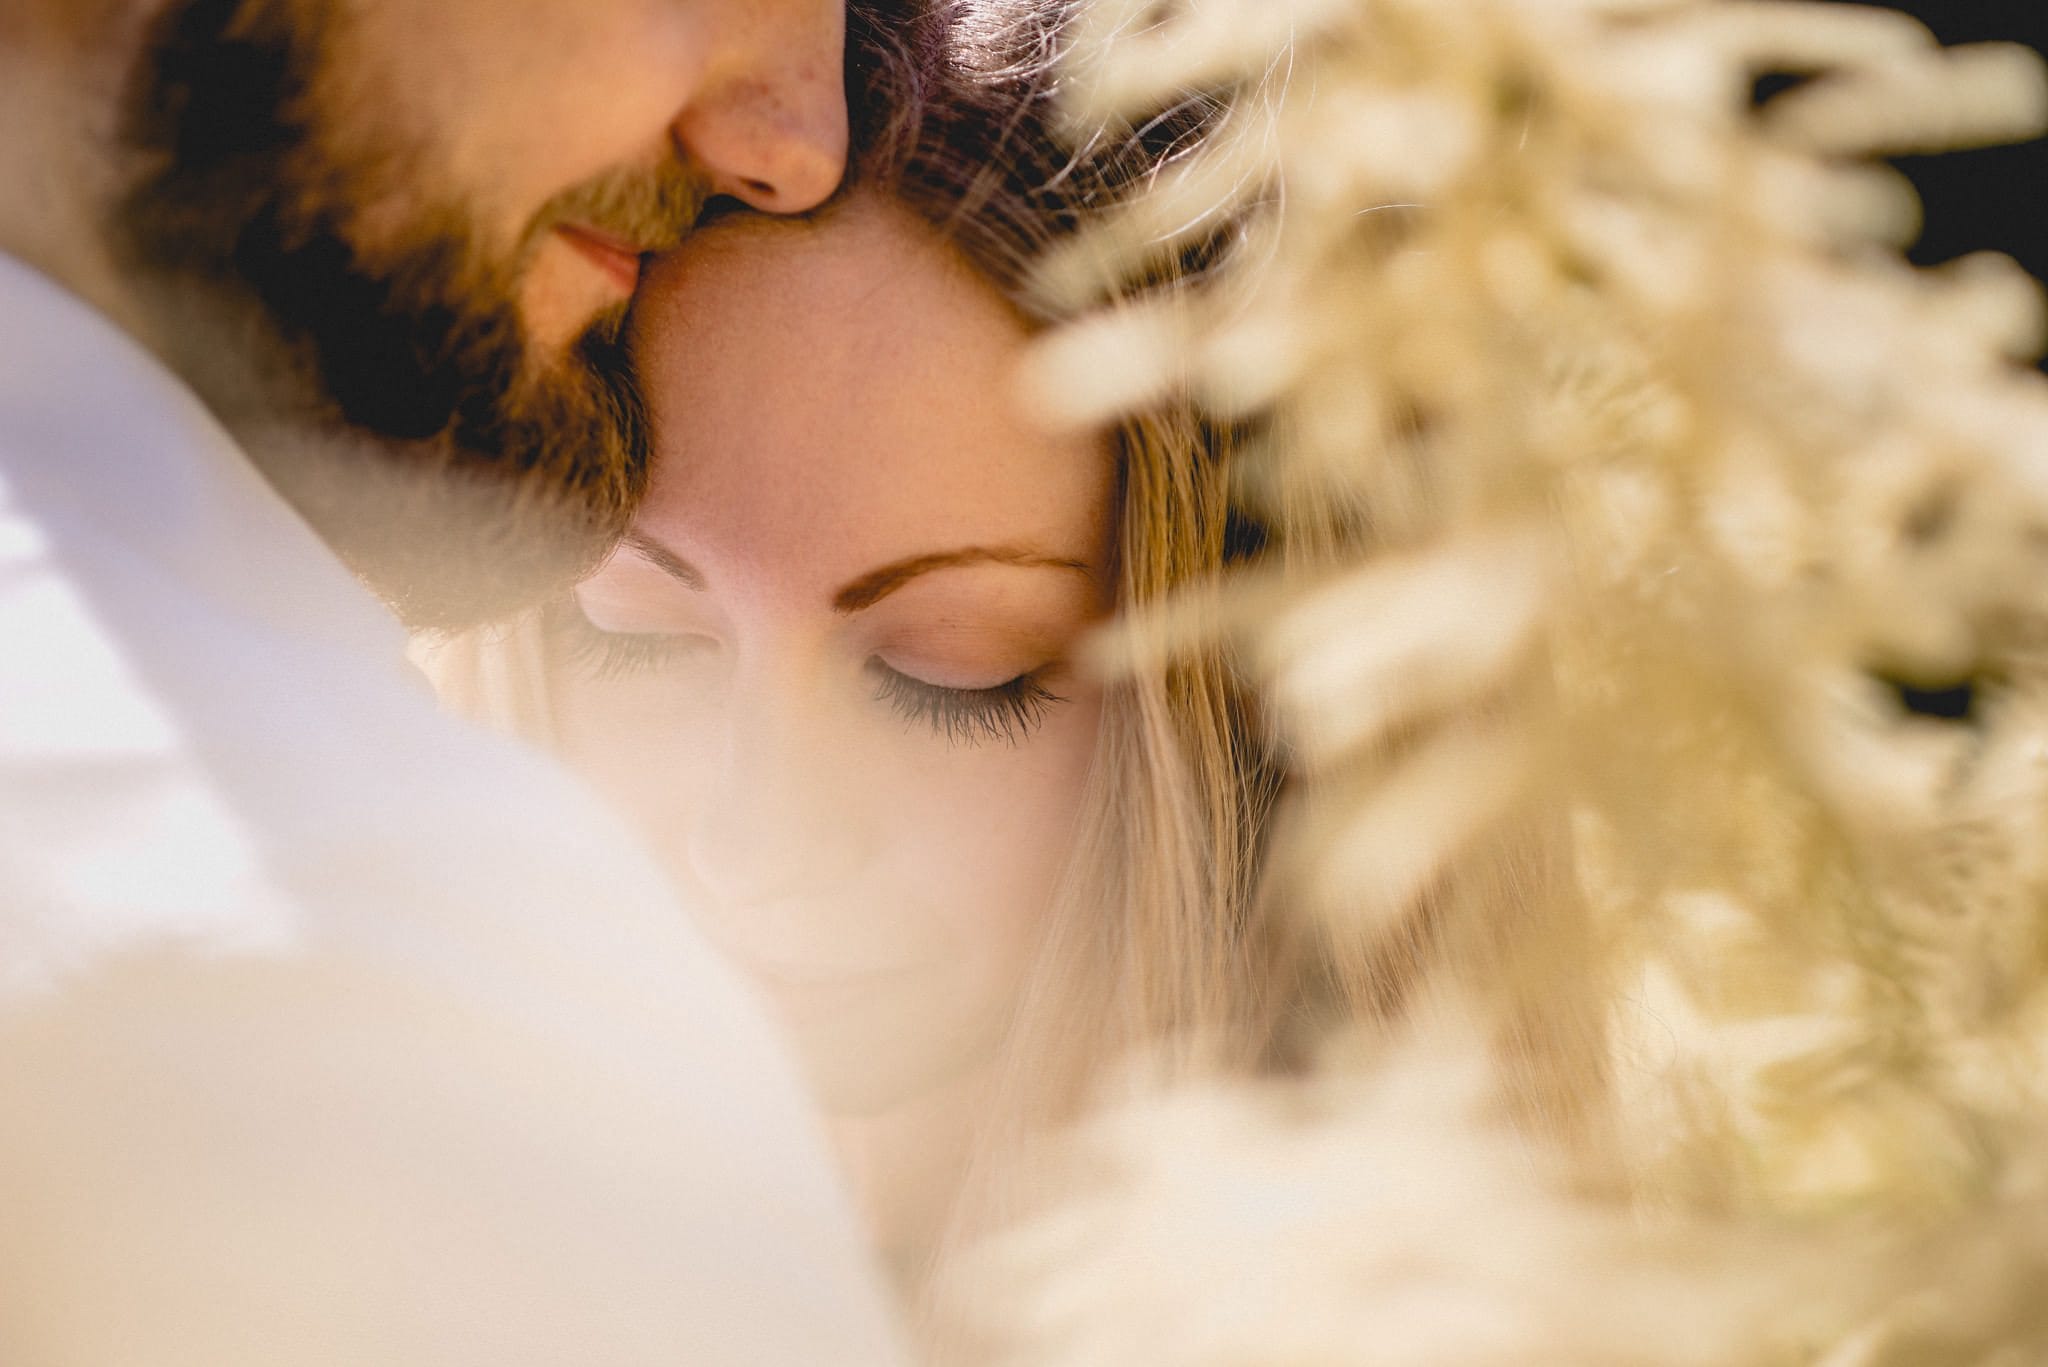 Find the best wedding photographer for you in 7 easy steps